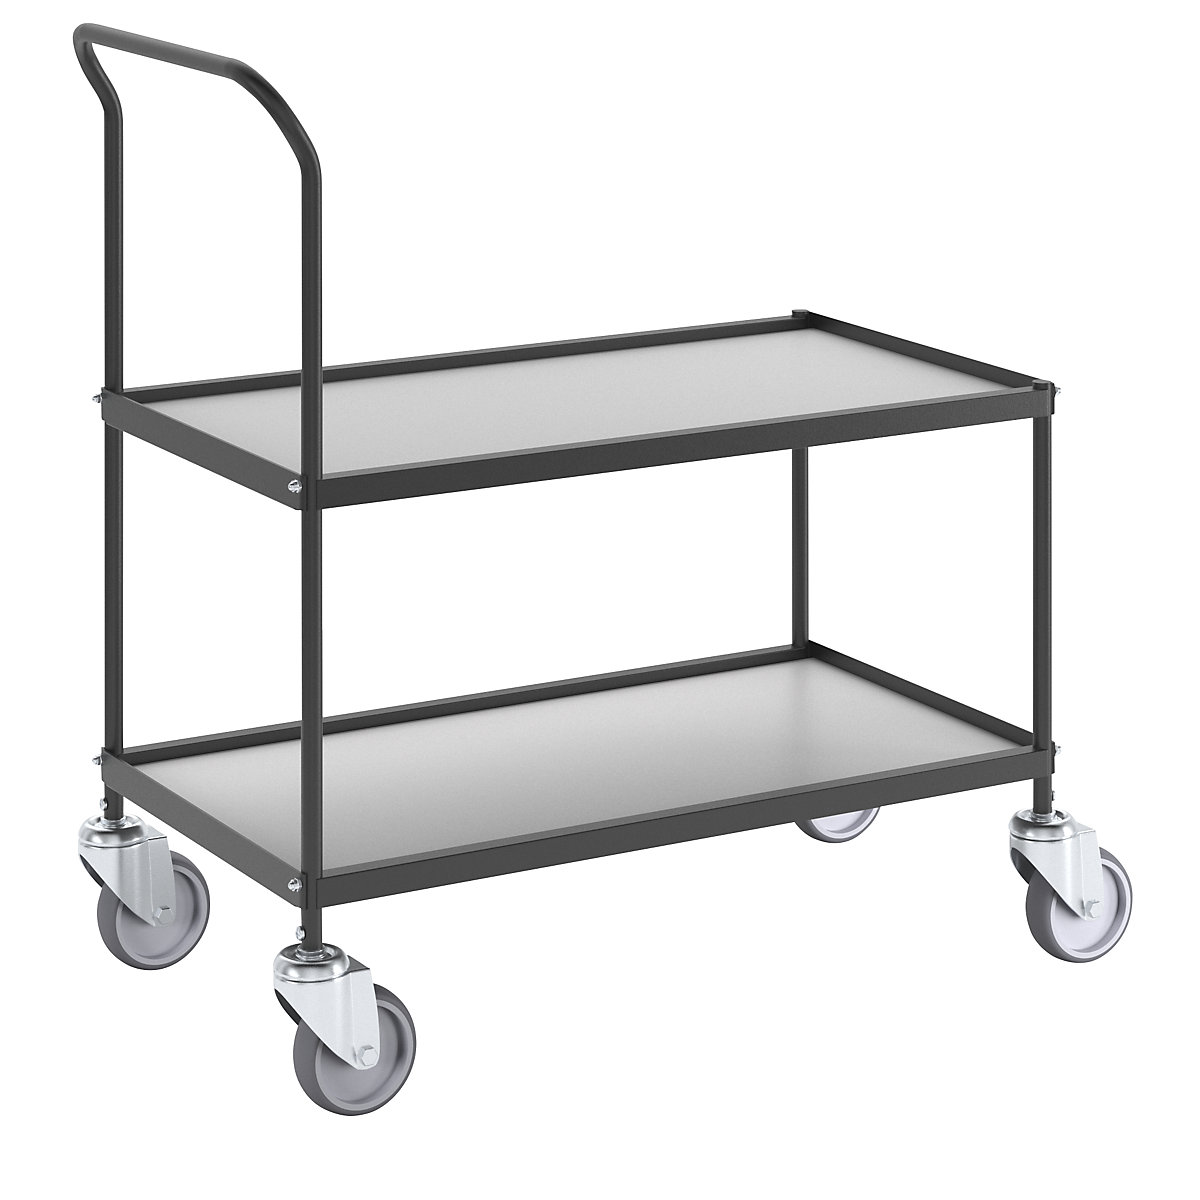 Serving and clearing trolley, 2 shelves, LxWxH 840 x 470 x 960 mm, 2+ items-4